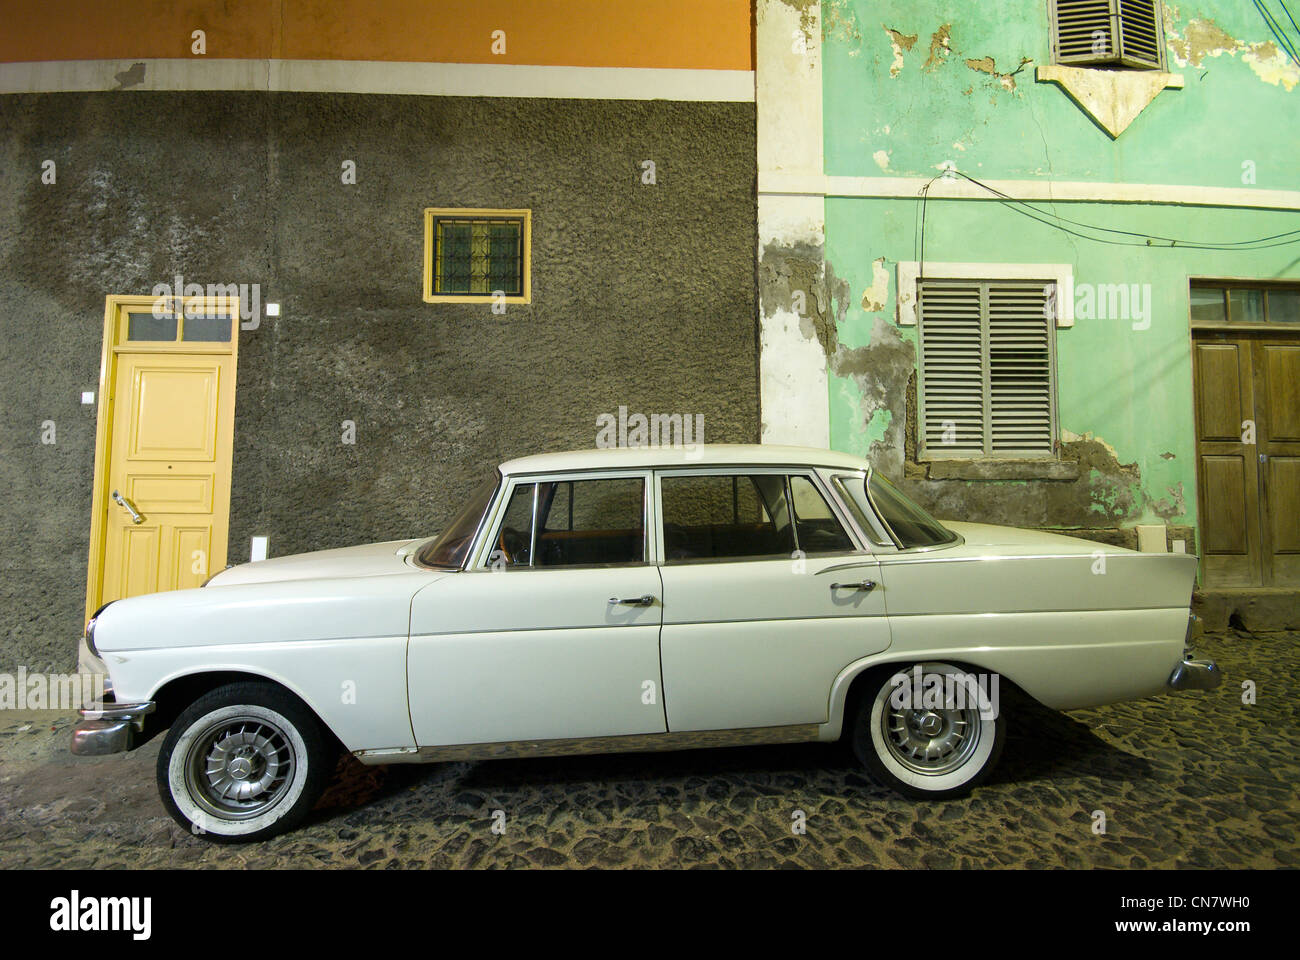 Cape Verde, Sao Vicente island, Mindelo, old Mercedes car under the light of a streetlight in the lanes of Mindelo Stock Photo